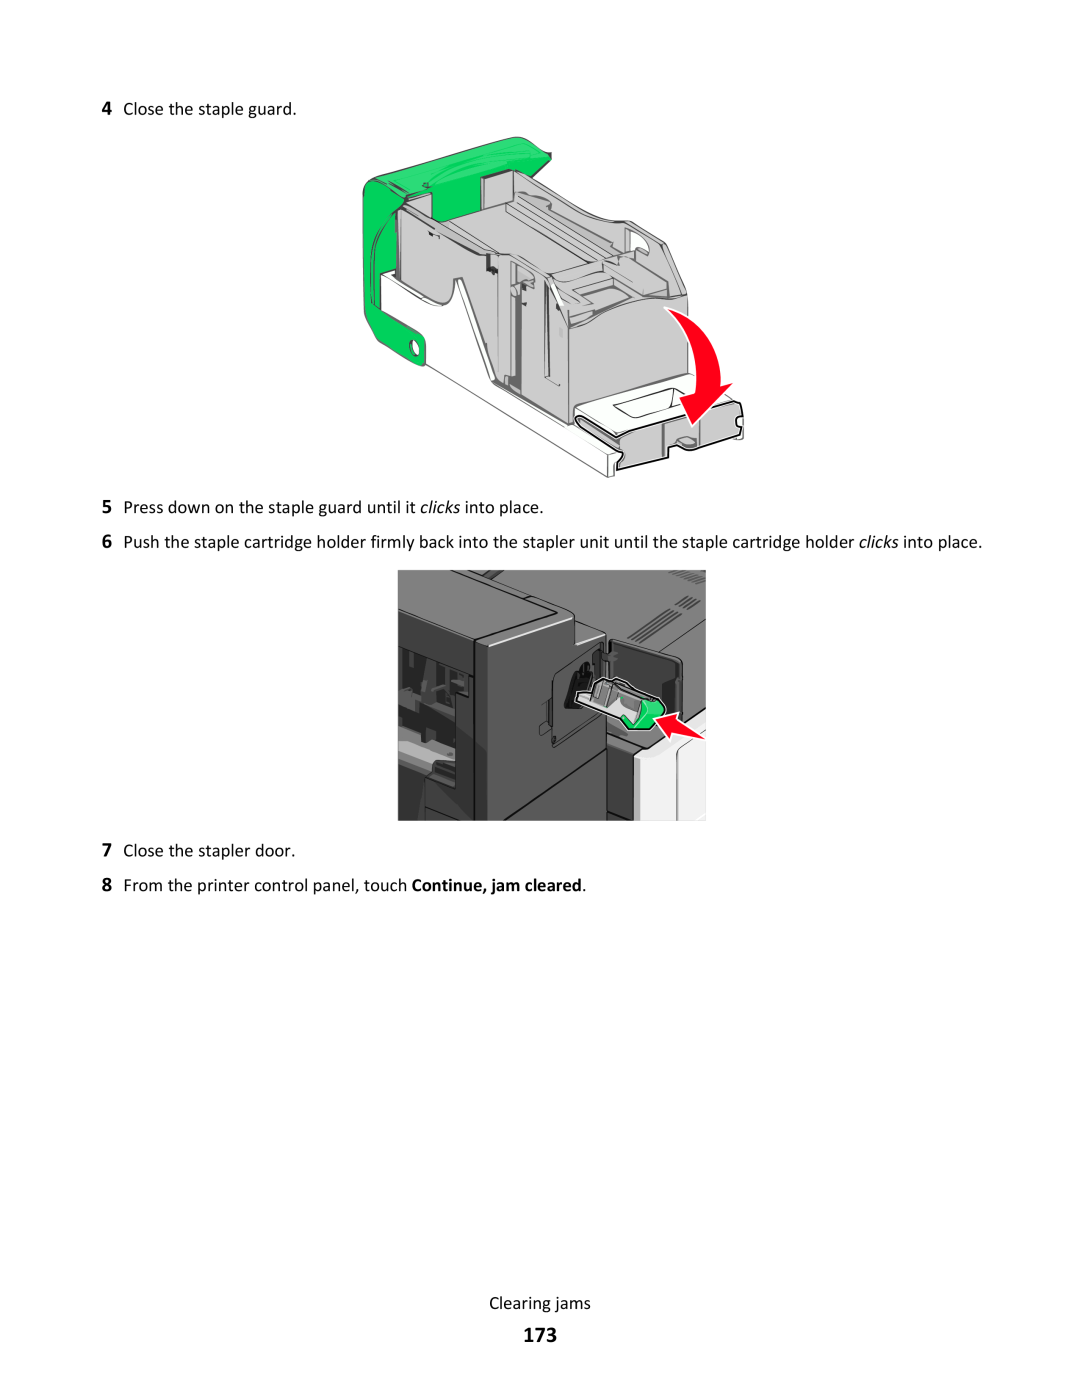 Lexmark C790 Close the staple guard, Press down on the staple guard until it clicks into place, Close the stapler door 